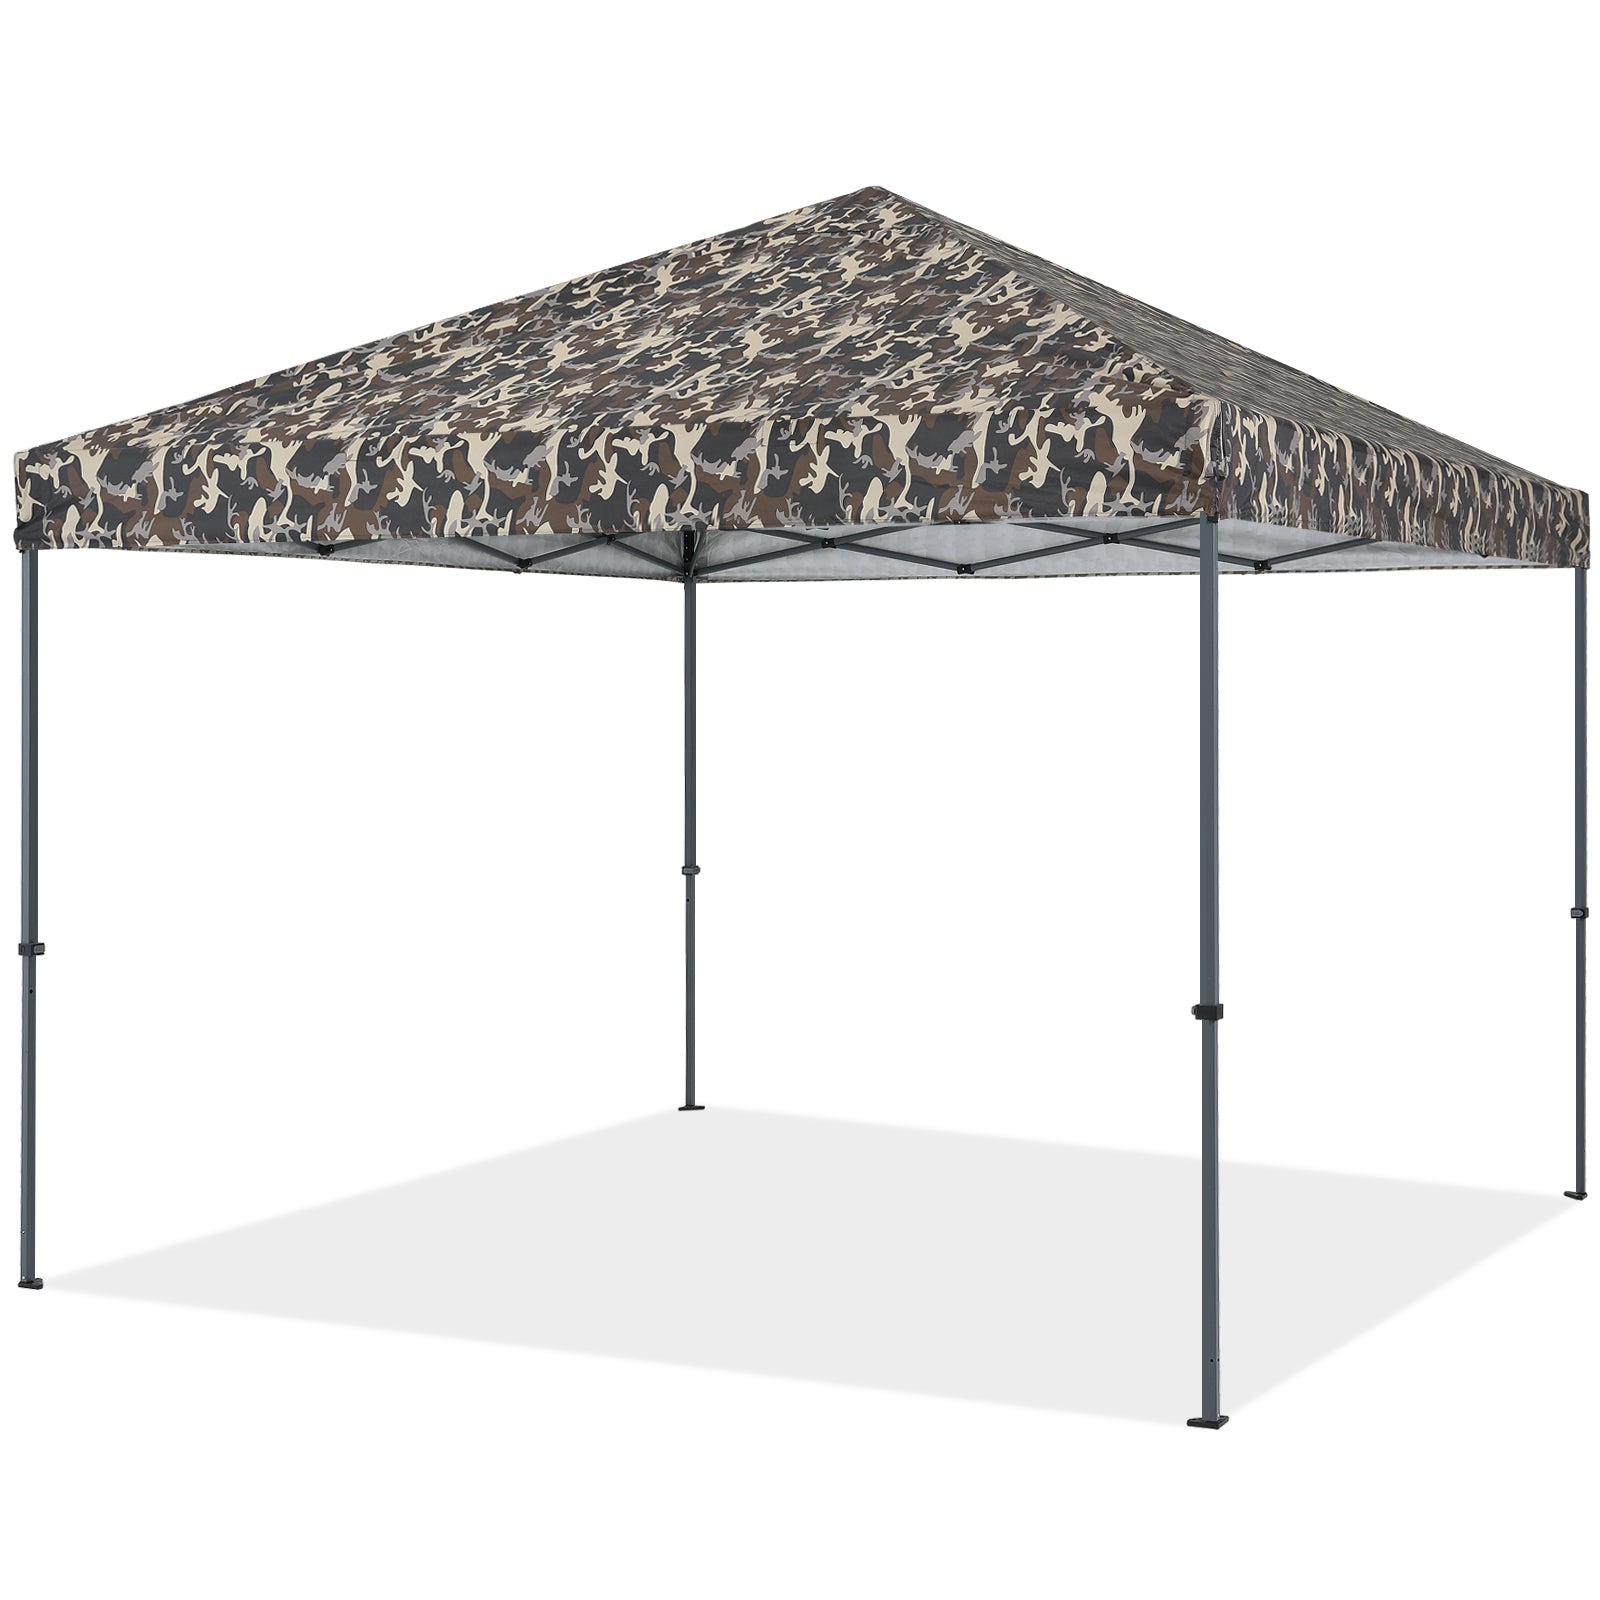 Outdoor Easy Pop up 10x10 Camping Canopy Tent With Graphic Print